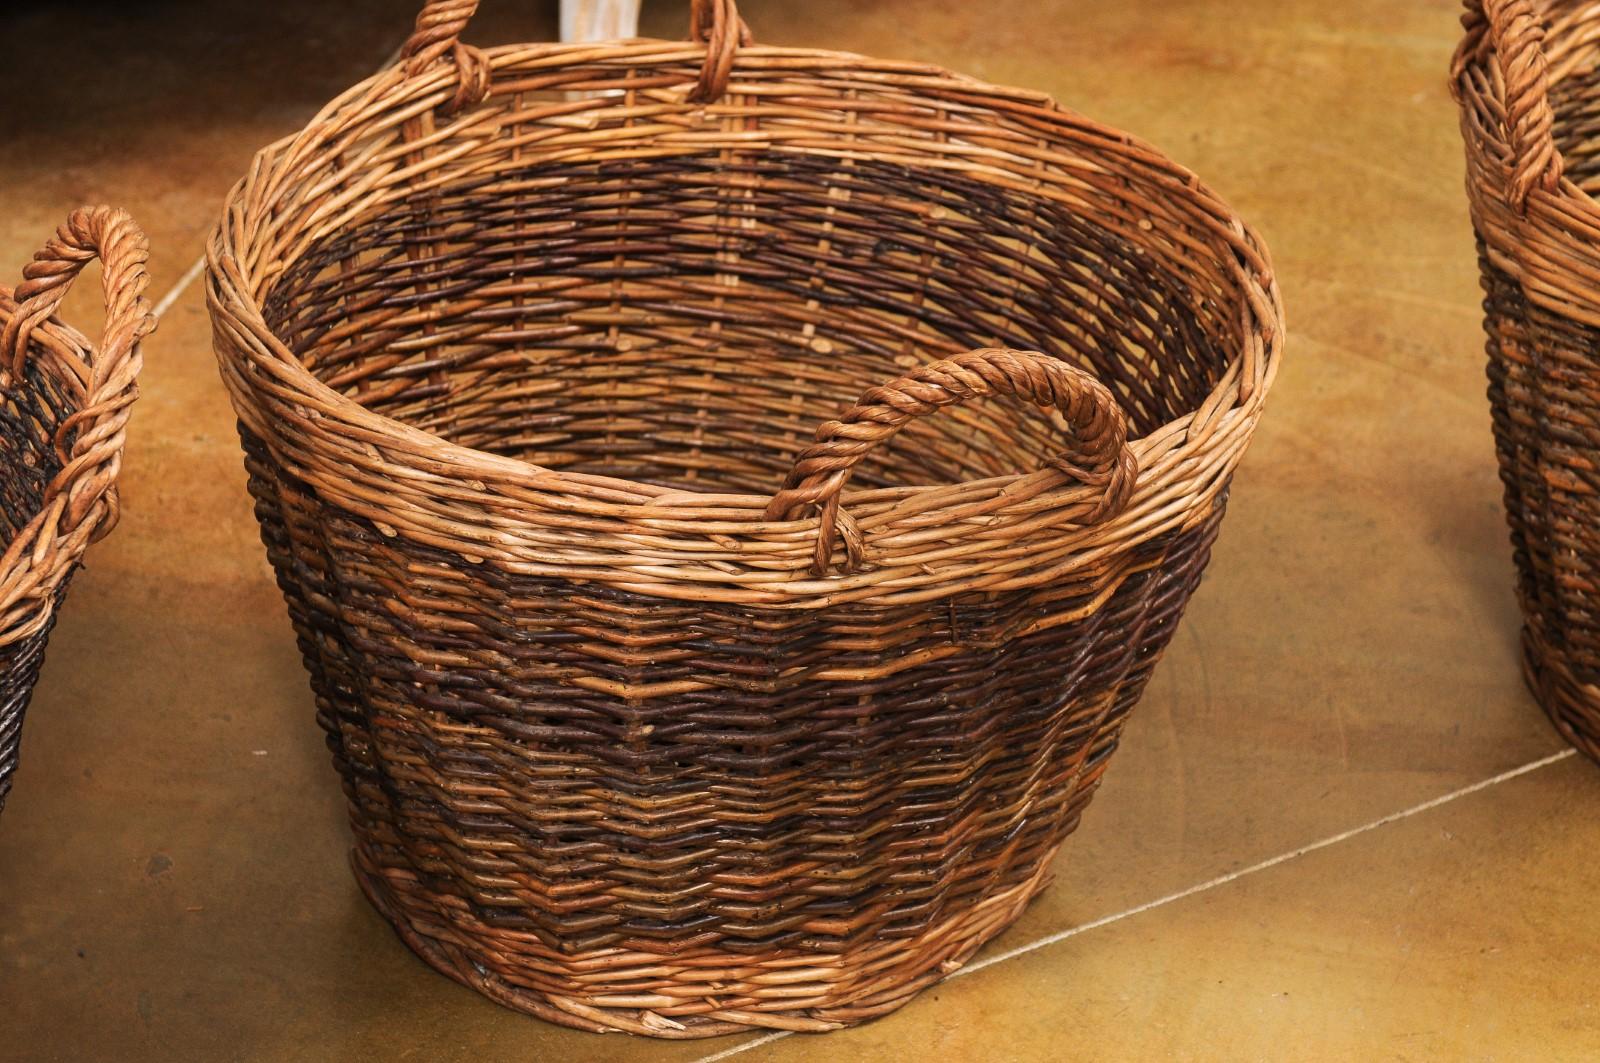 Handmade English Two Toned Wicker Baskets from Devon with Double Handles, Each 6